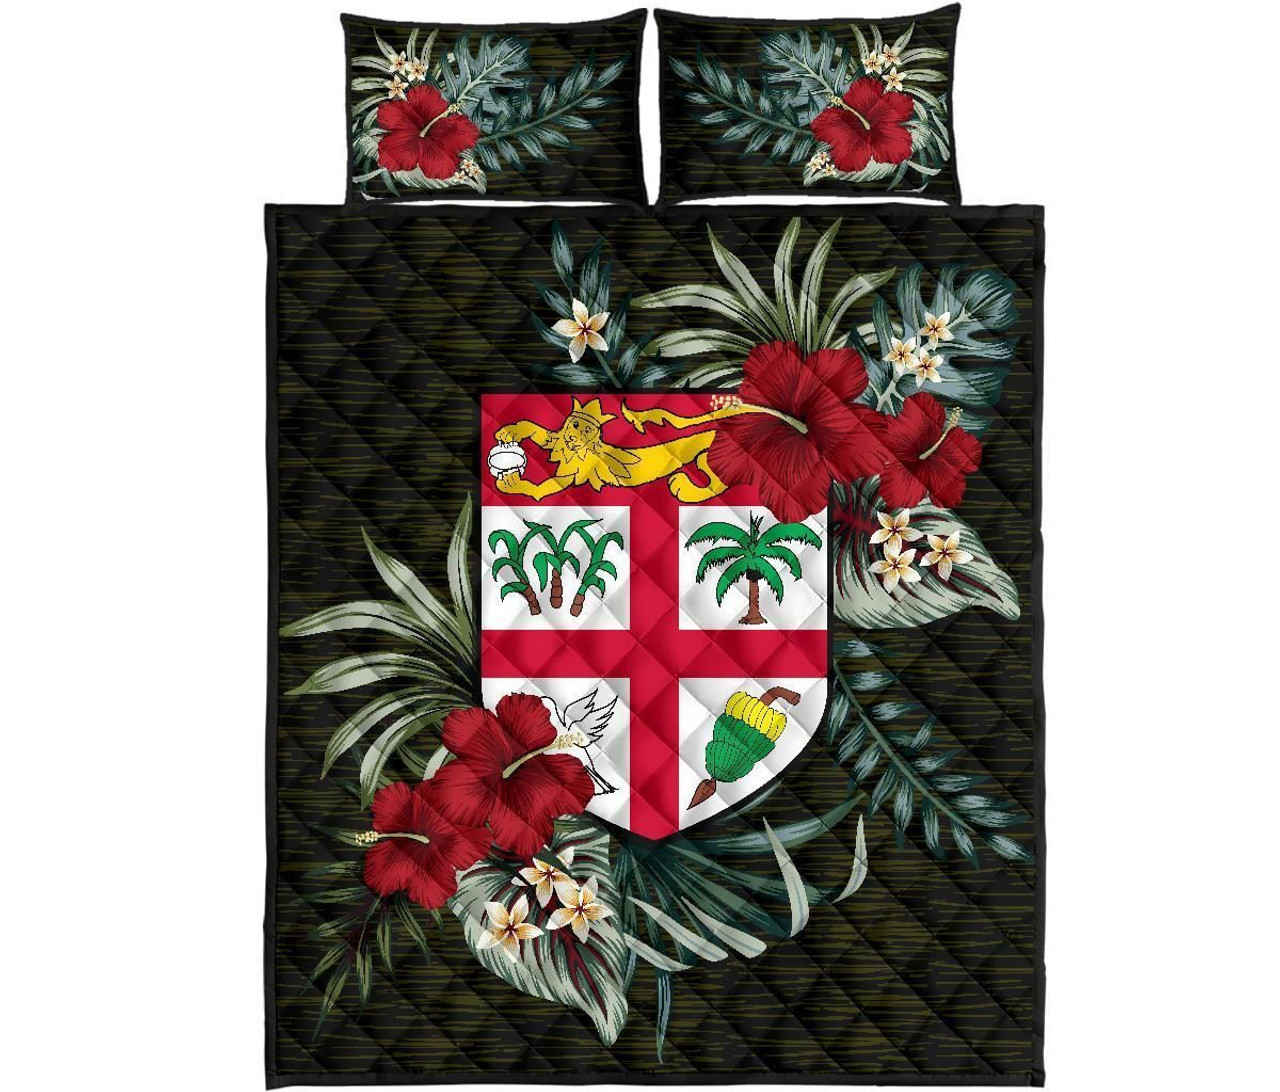 Fiji Polynesian Quilt Bed Set - Special Hibiscus 5